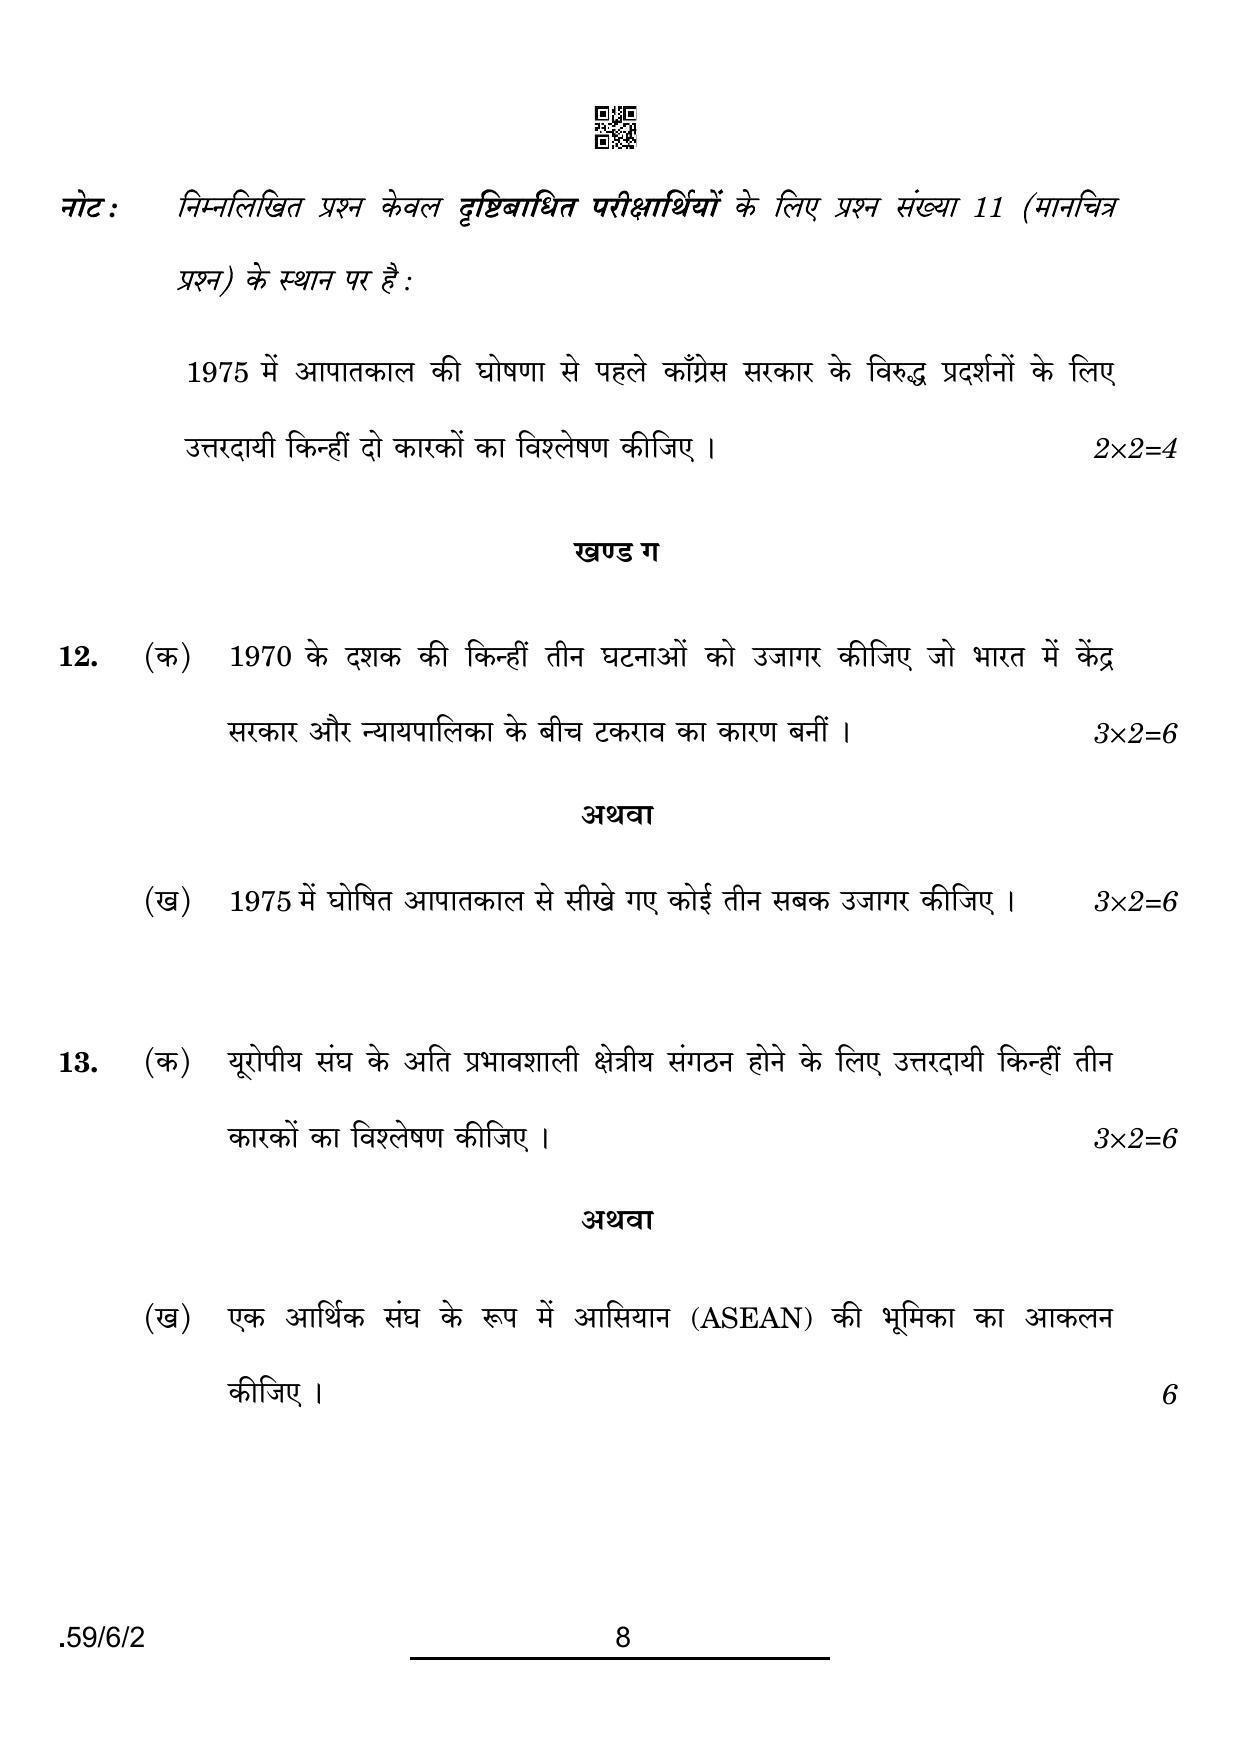 CBSE Class 12 59-6-2 POL SCIENCE 2022 Compartment Question Paper - Page 8